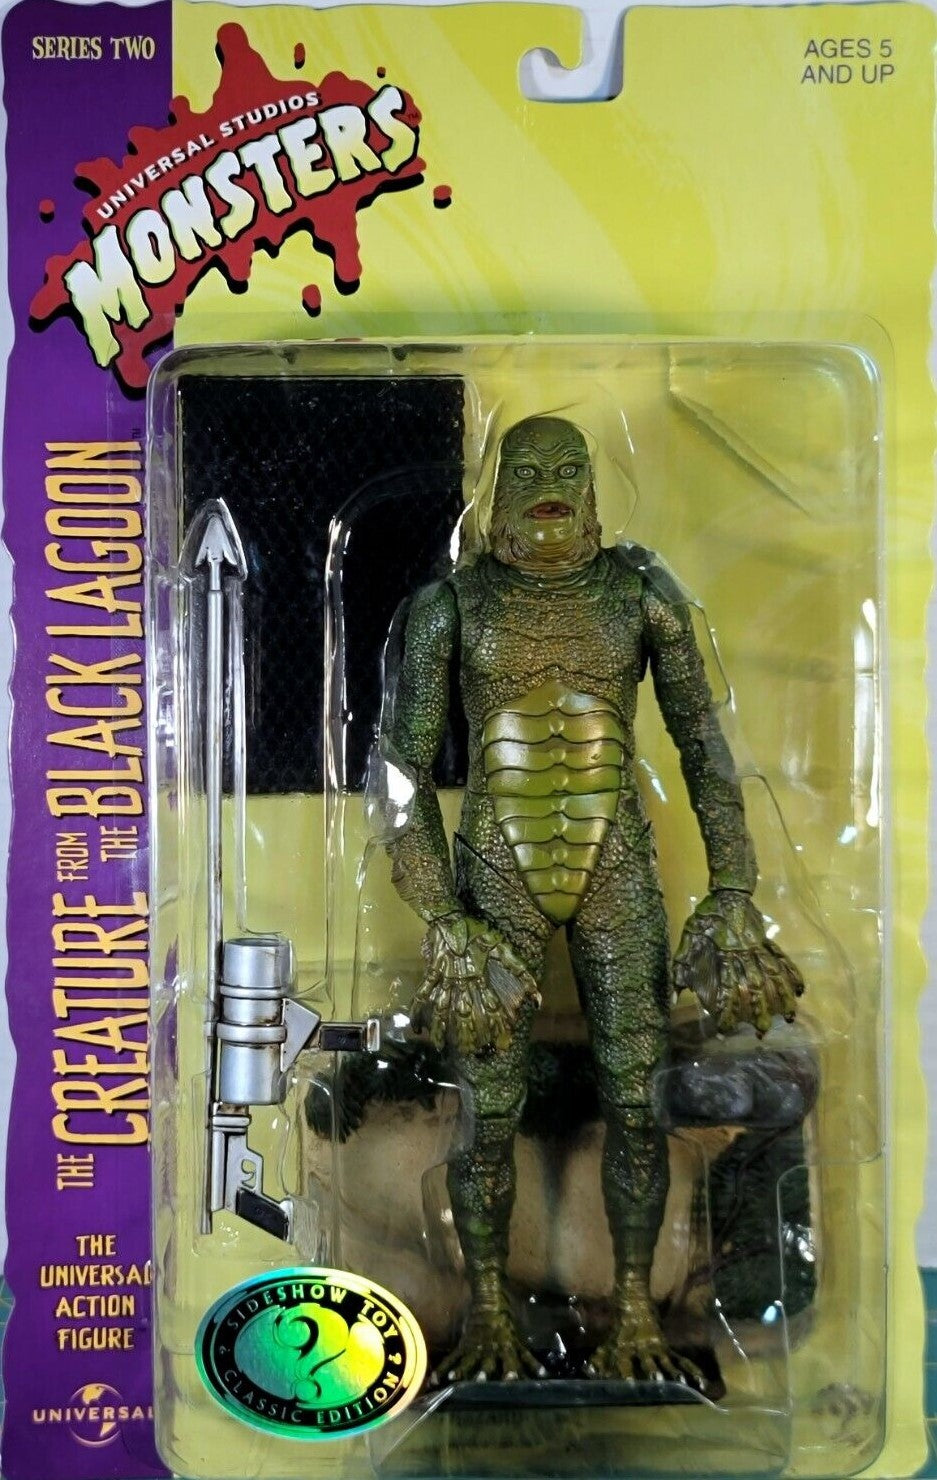 Universal Studios Monsters series 2 Creature from the Black Lagoon action figure